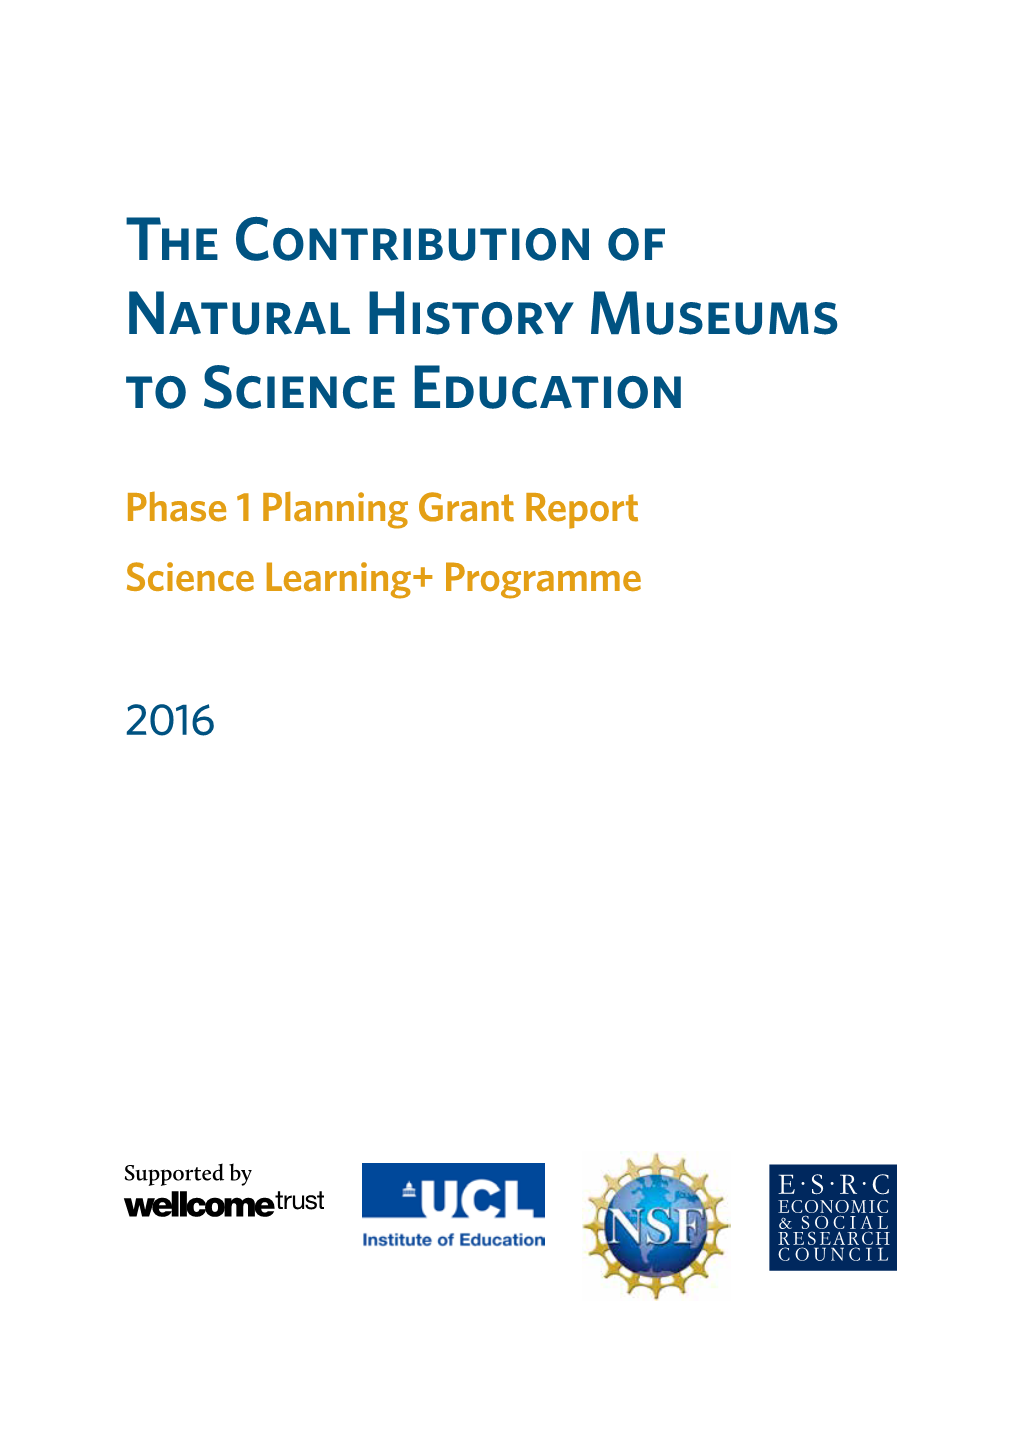 The Contribution of Natural History Museums to Science Education